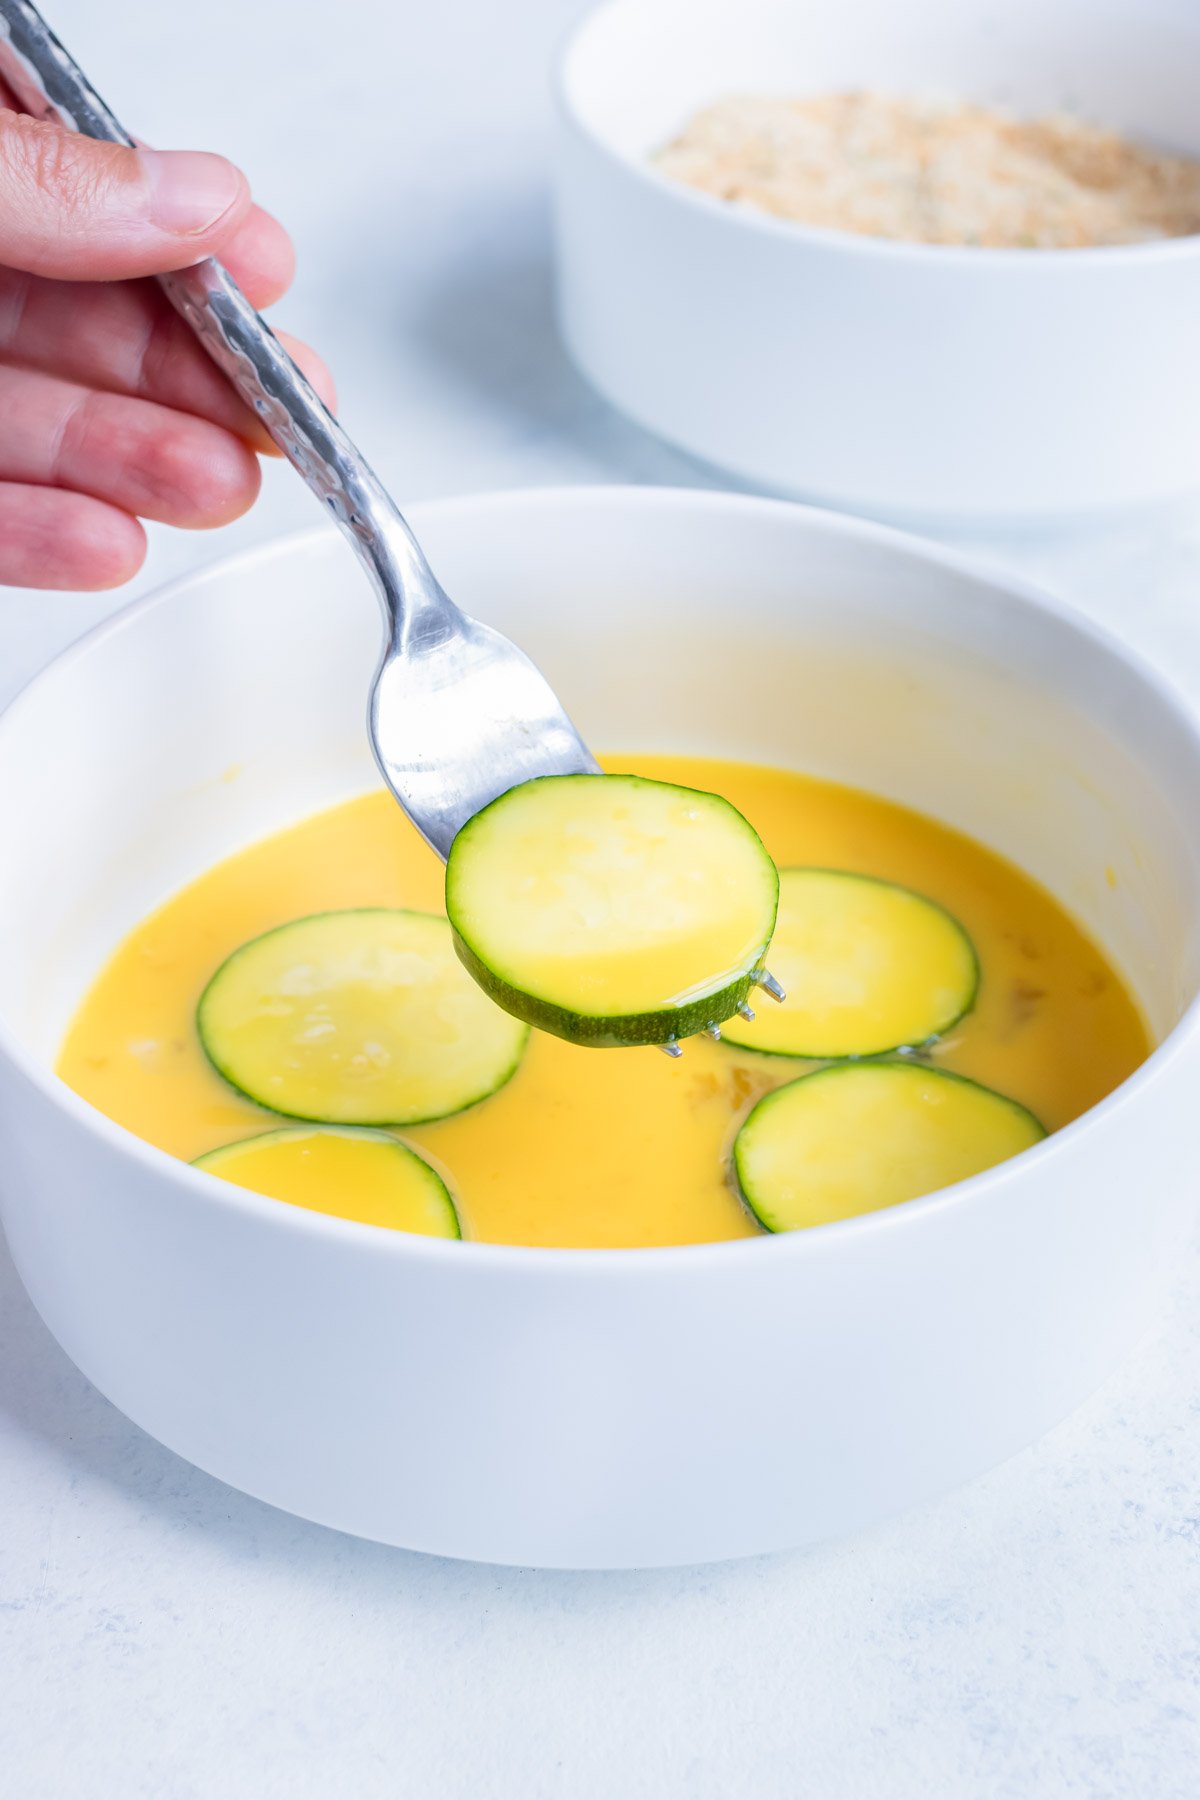 Zucchini chips are dipped in an egg mixture before being coated in breadcrumbs.